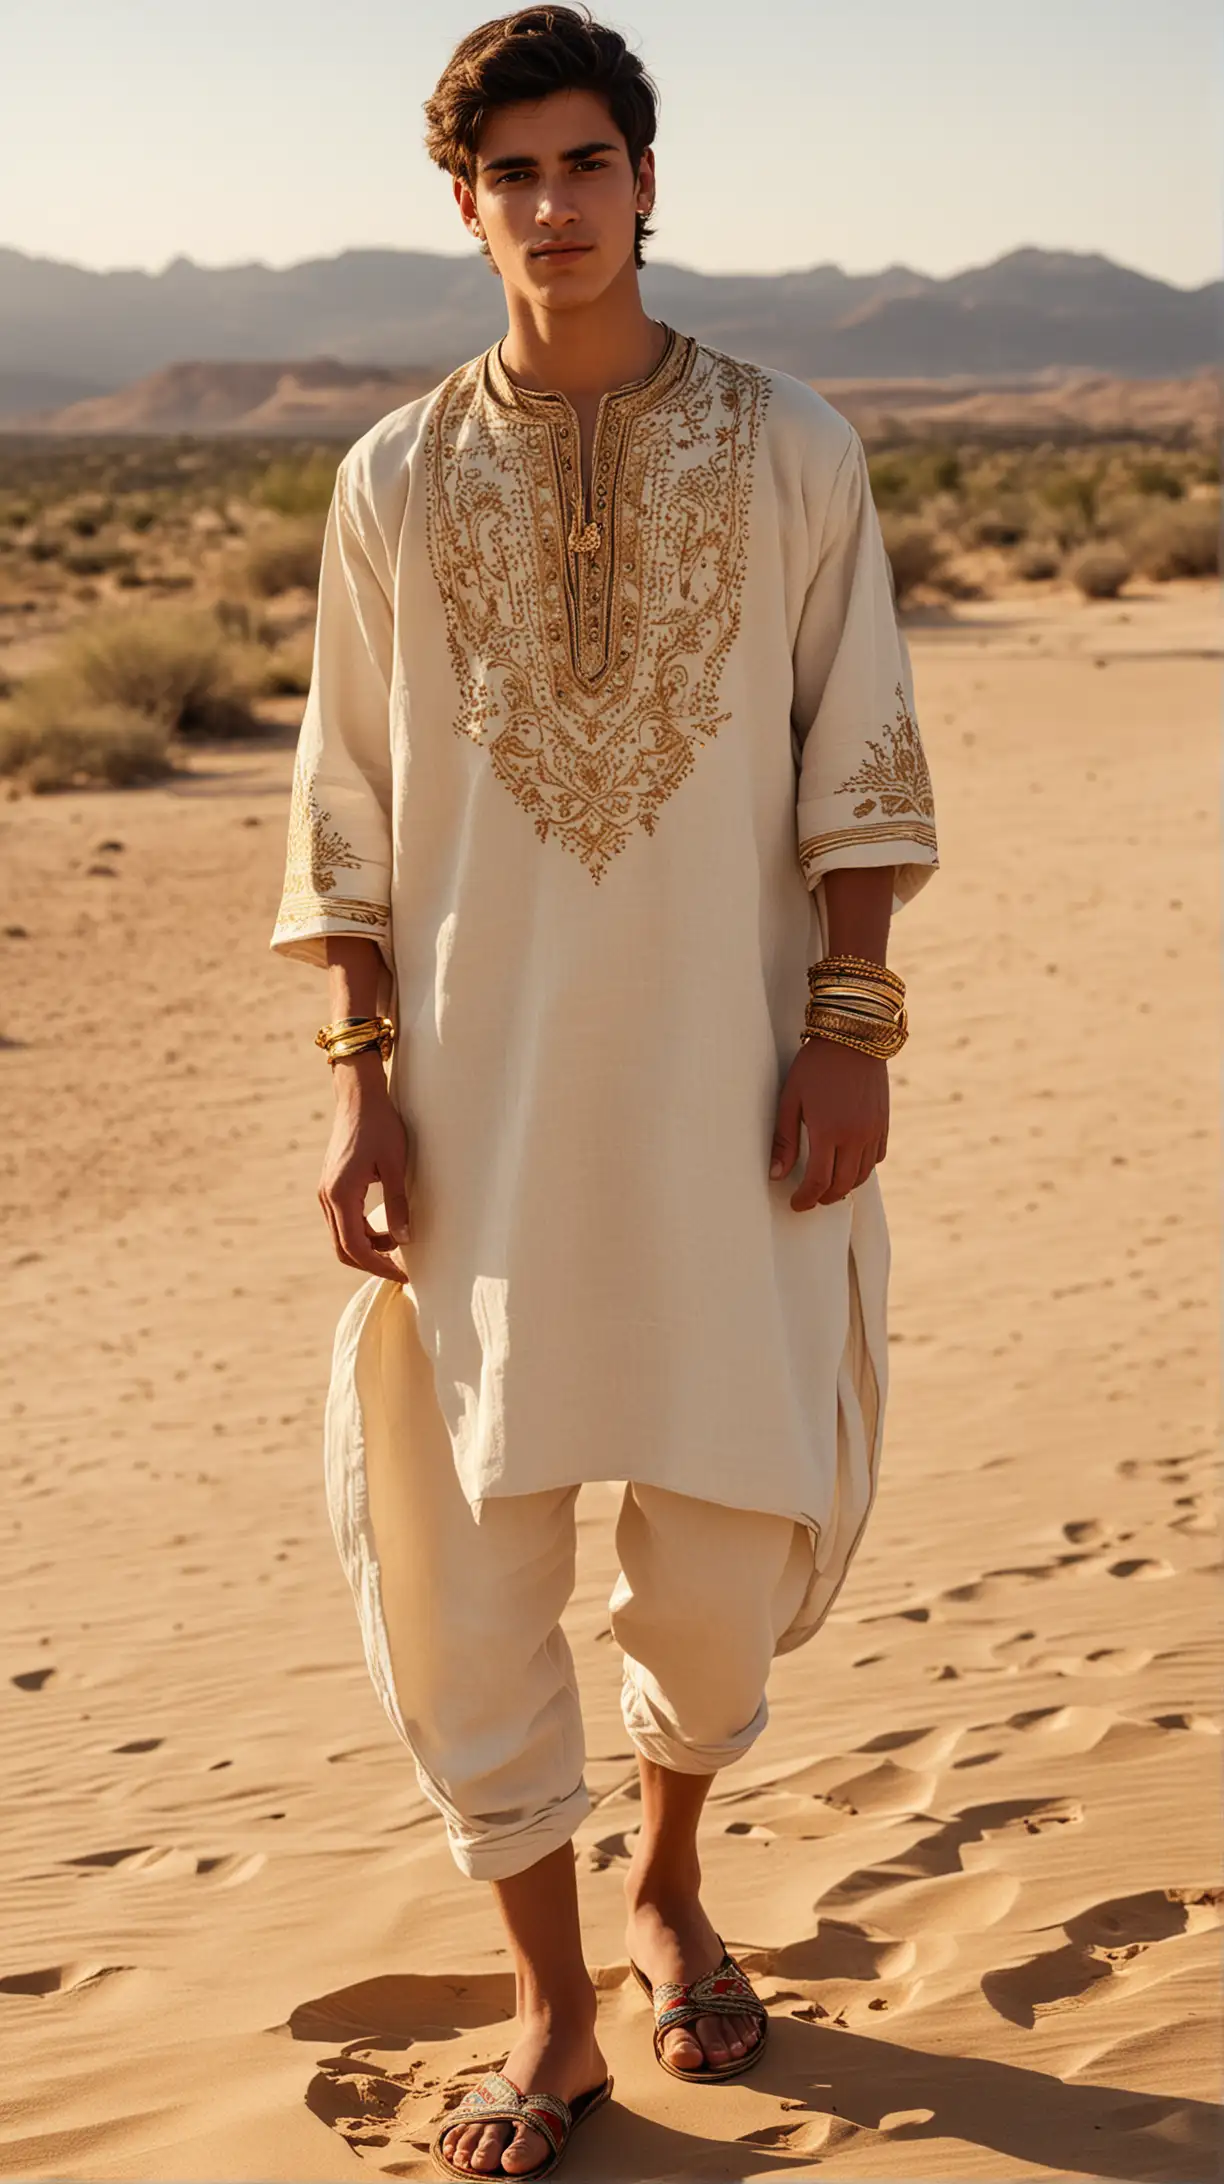 a full body shot photo of an 18 year old man wearing a linen khaftan embroidered in gold, sandals, standing in the desert with the sunlight behind them